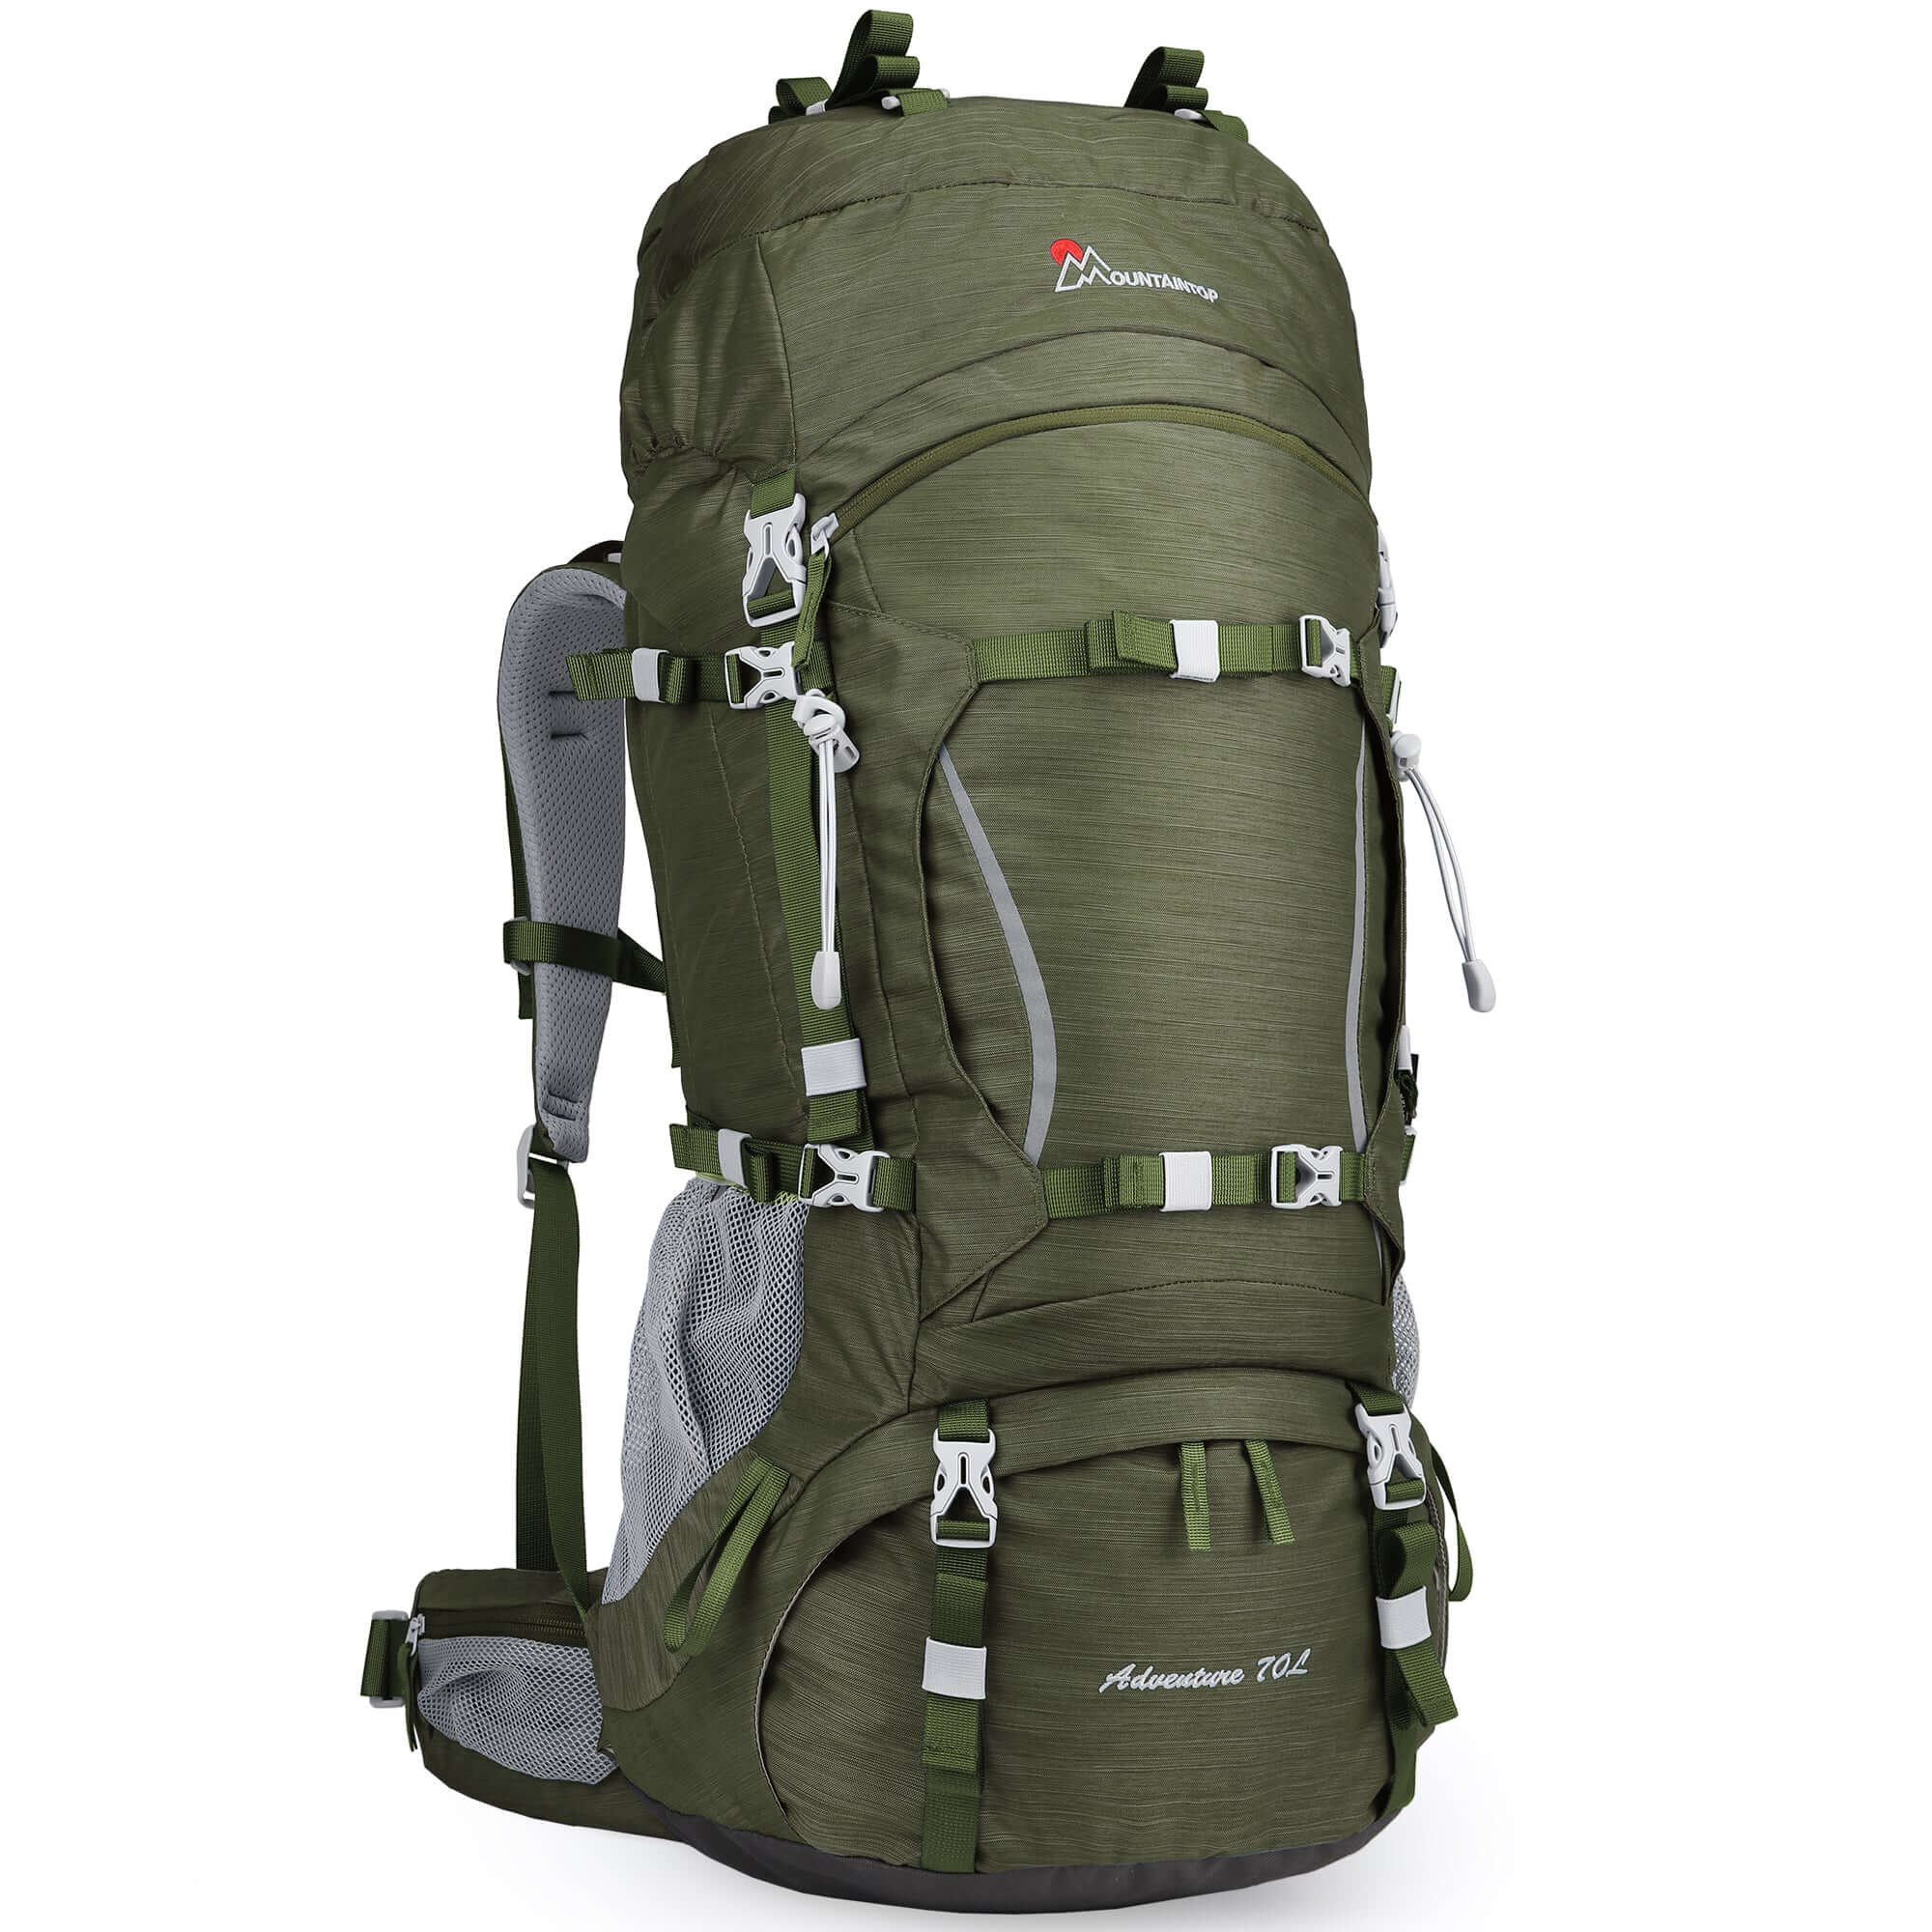 [M5805II]MOUNTAINTOP? 70L Internal Frame Backpack with Rain Cover